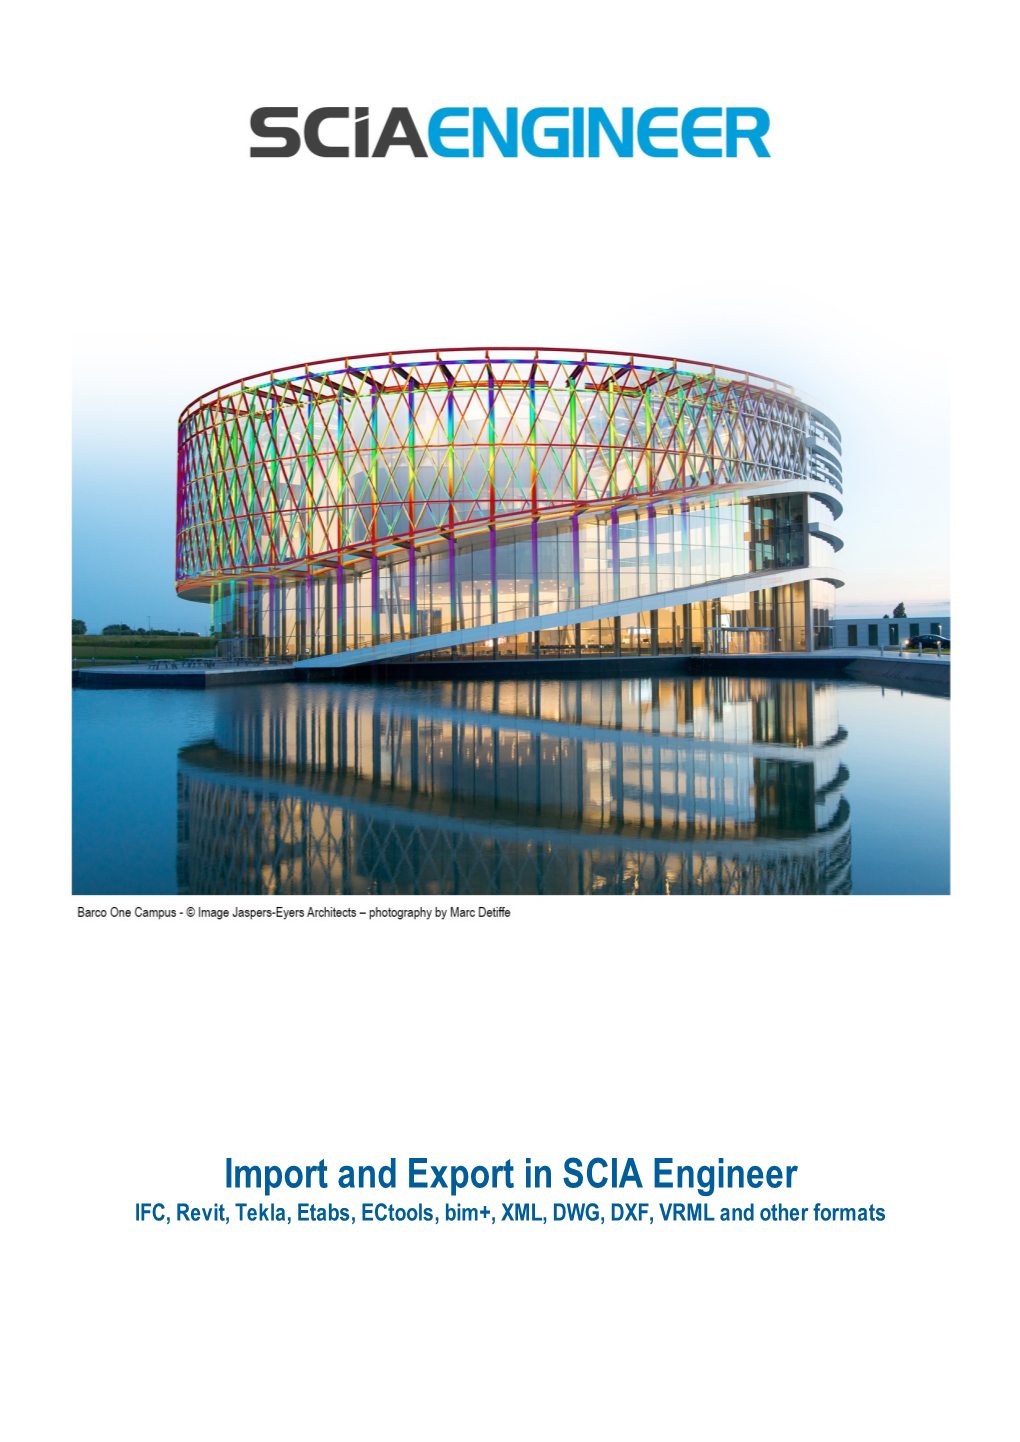 Import and Export in SCIA Engineer IFC, Revit, Tekla, Etabs, Ectools, Bim+, XML, DWG, DXF, VRML and Other Formats Chapter 0